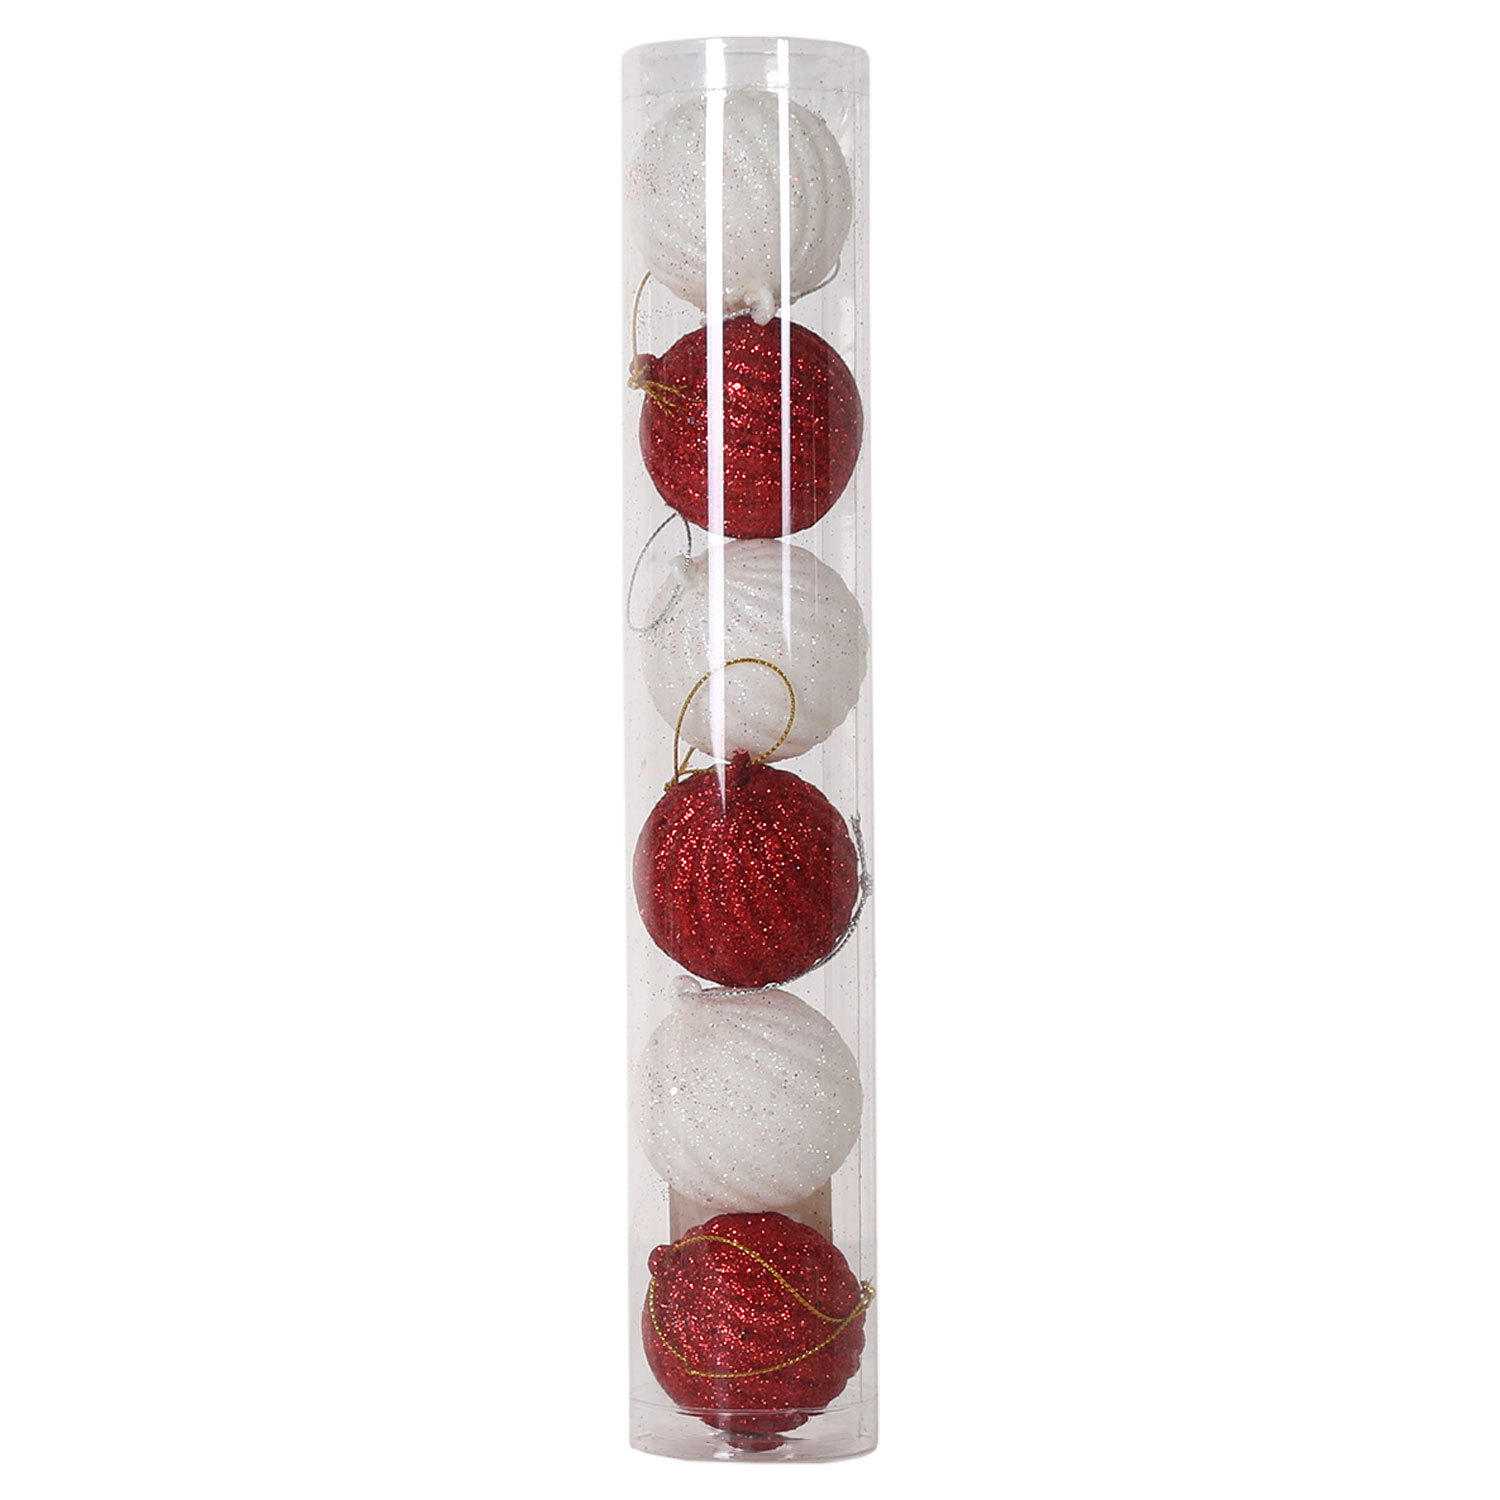 Candy Cane Lane Red and White Glitter Baubles 6 Pack Image